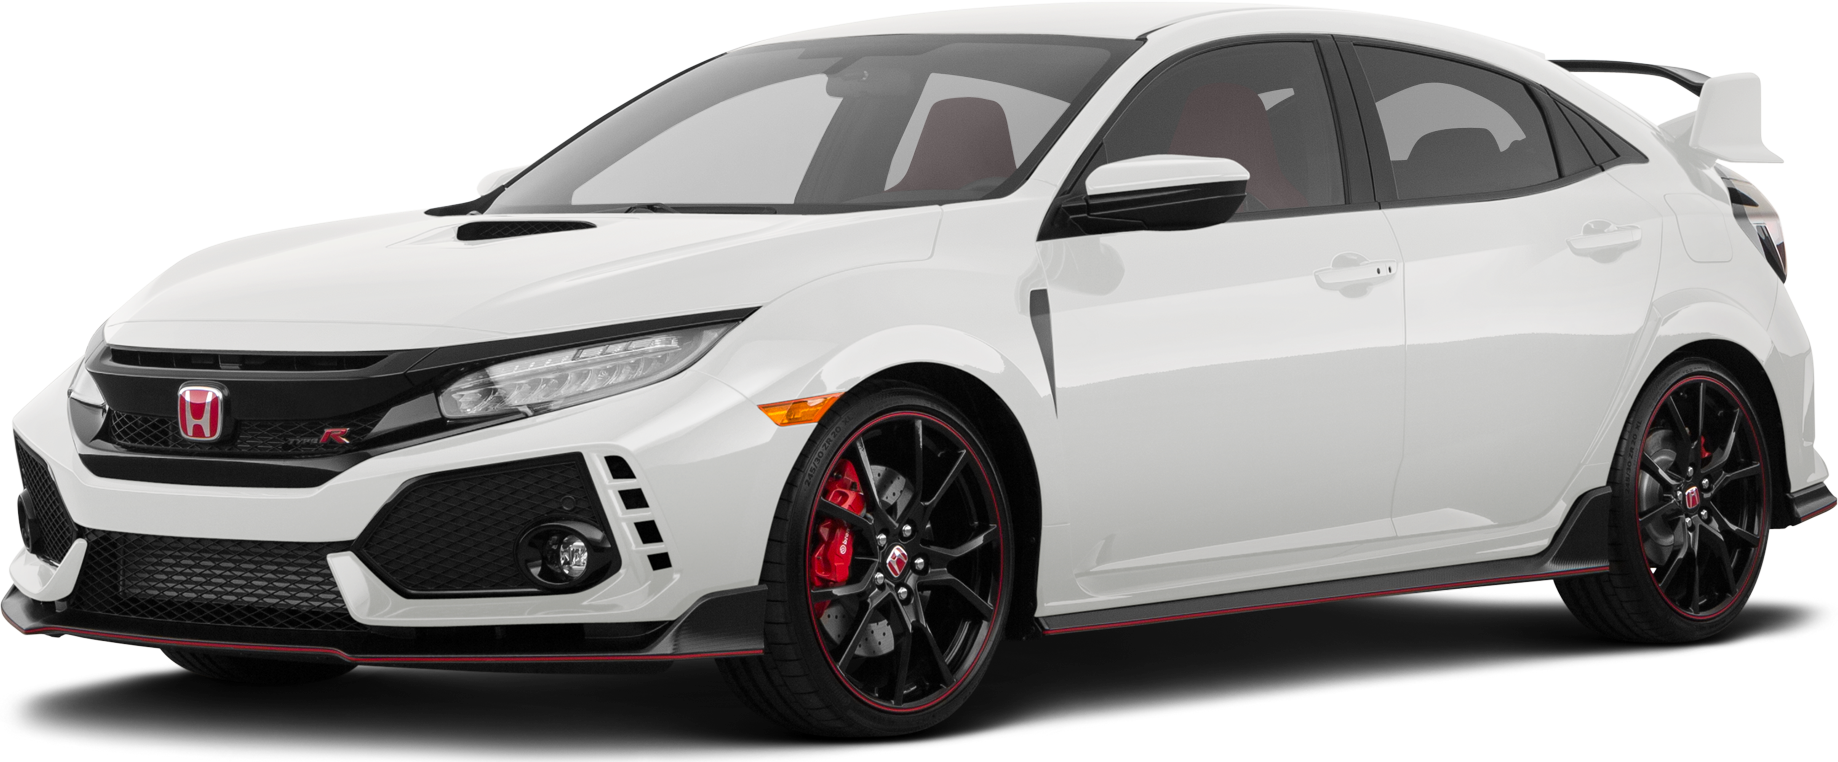 Juster Behandling Gooey 2018 Honda Civic Type R Values & Cars for Sale | Kelley Blue Book